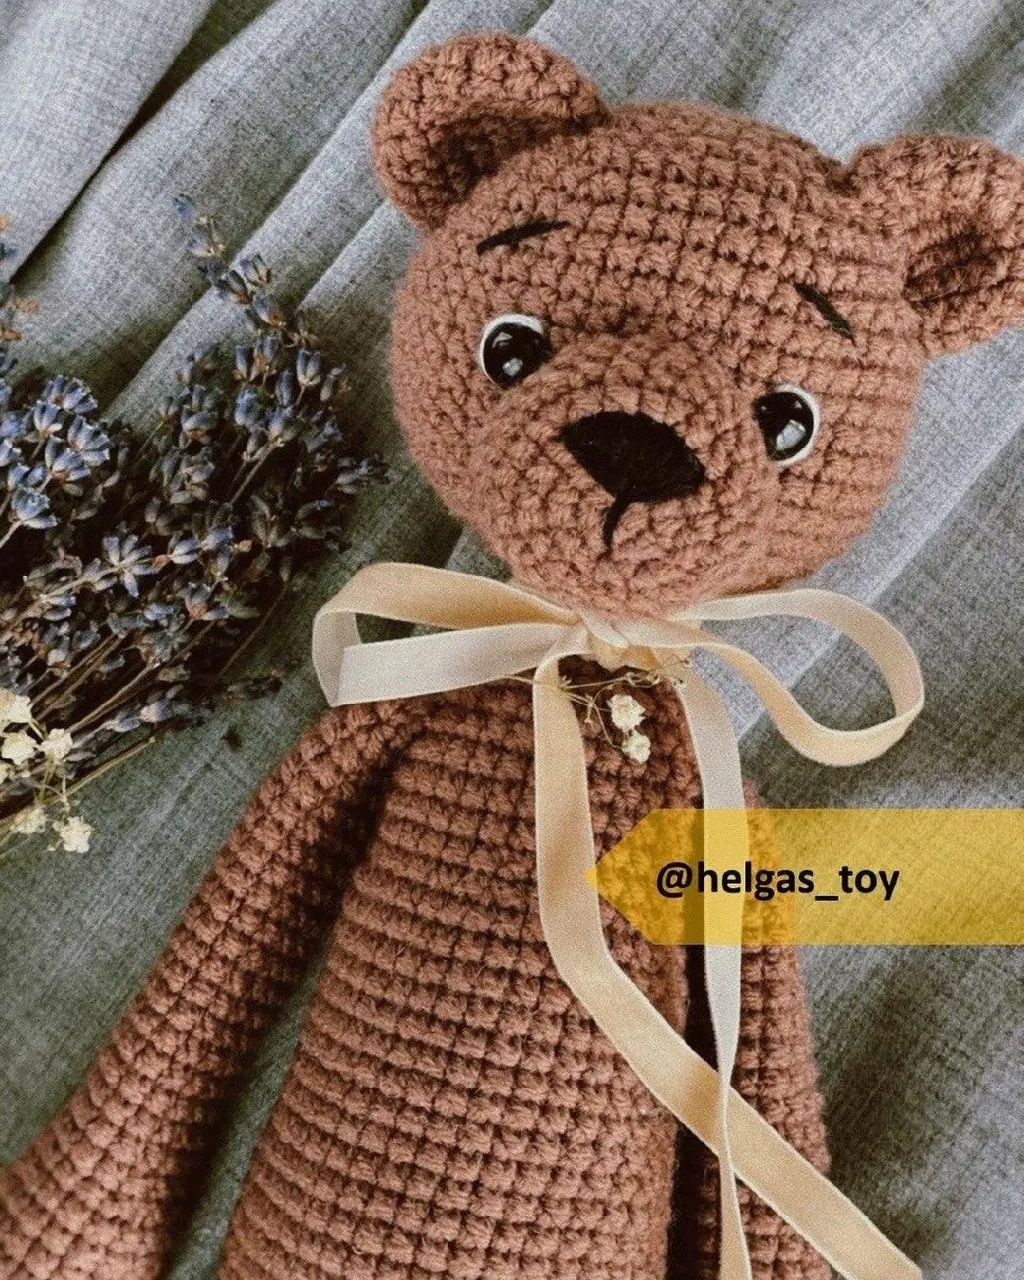 Brown bear crochet pattern with bows